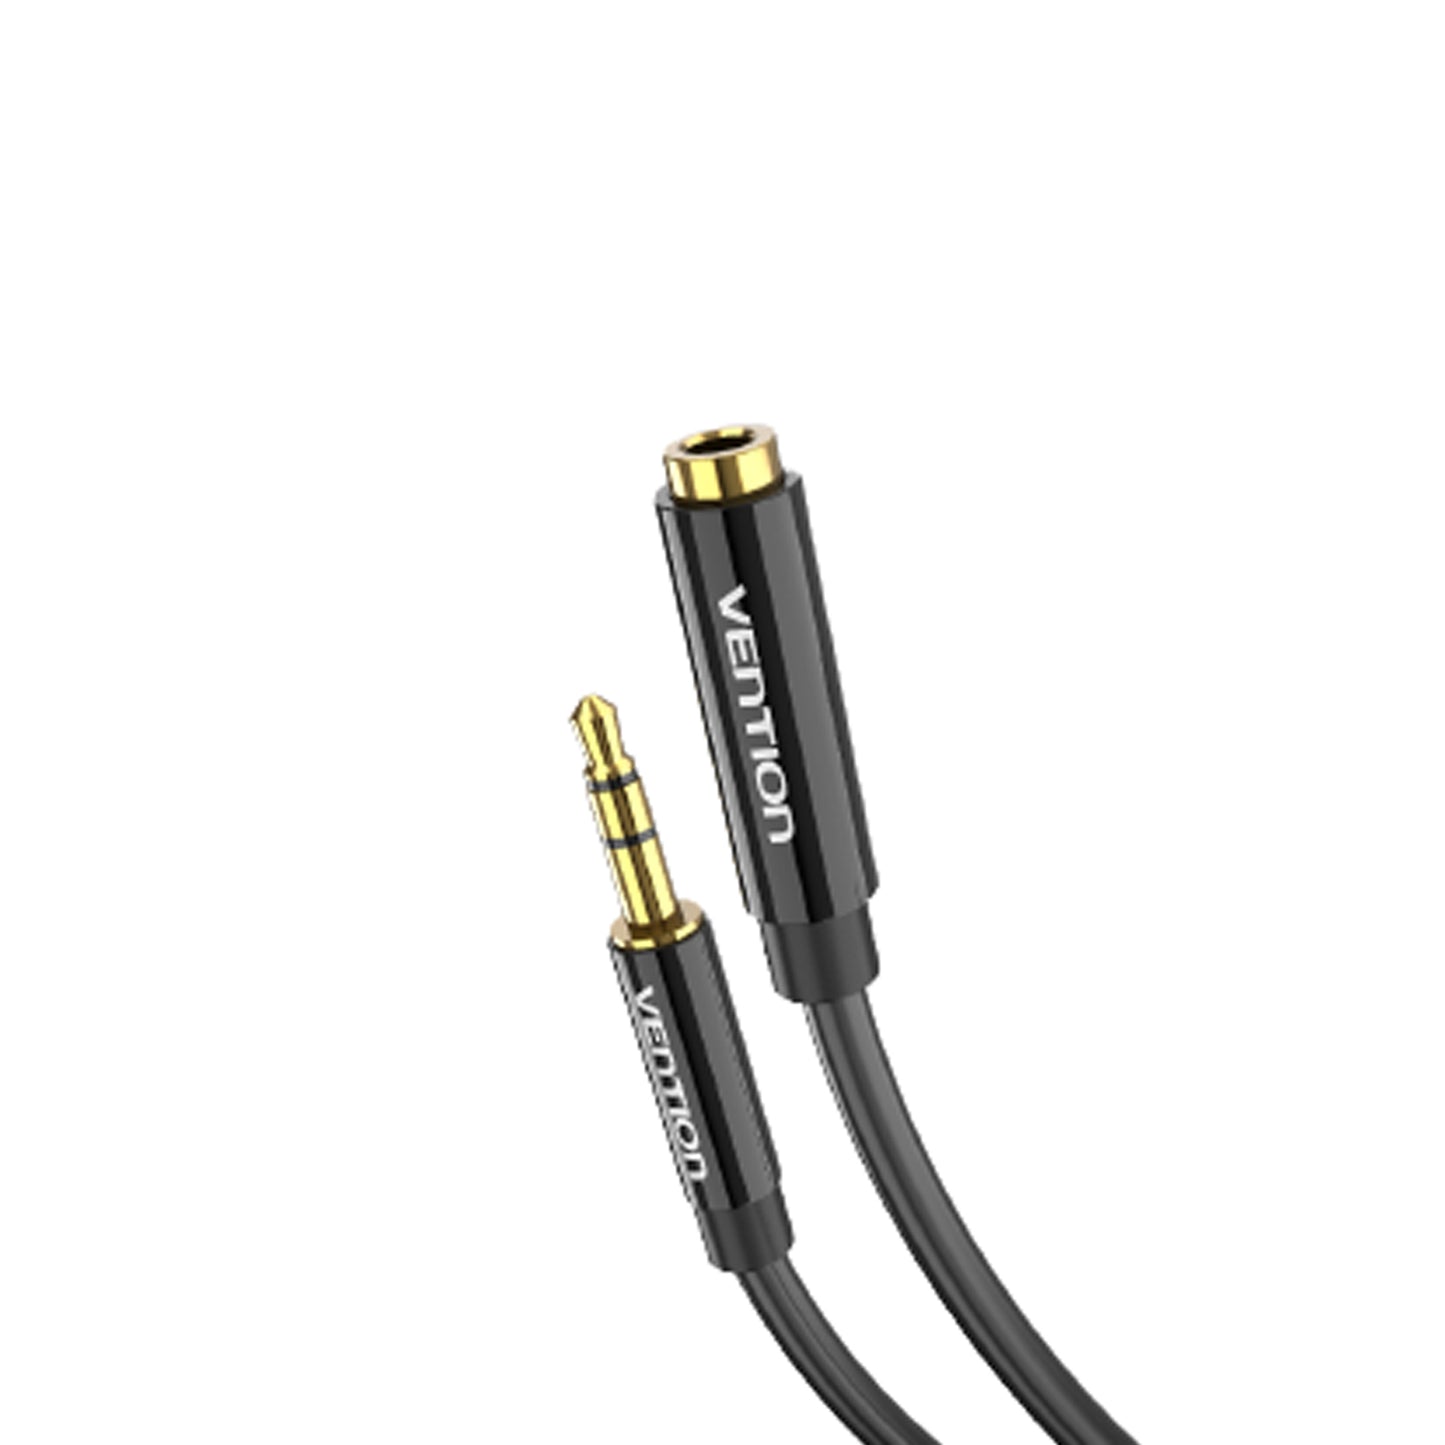 Vention TRS 3.5mm Female to TRS 3.5mm Male Gold Plated (BBZ) Audio Cable for PC, Laptops, Mobile Phones, Earphones, Speakers (Available in 0.5M, 1M, 1.5M, and 2M)